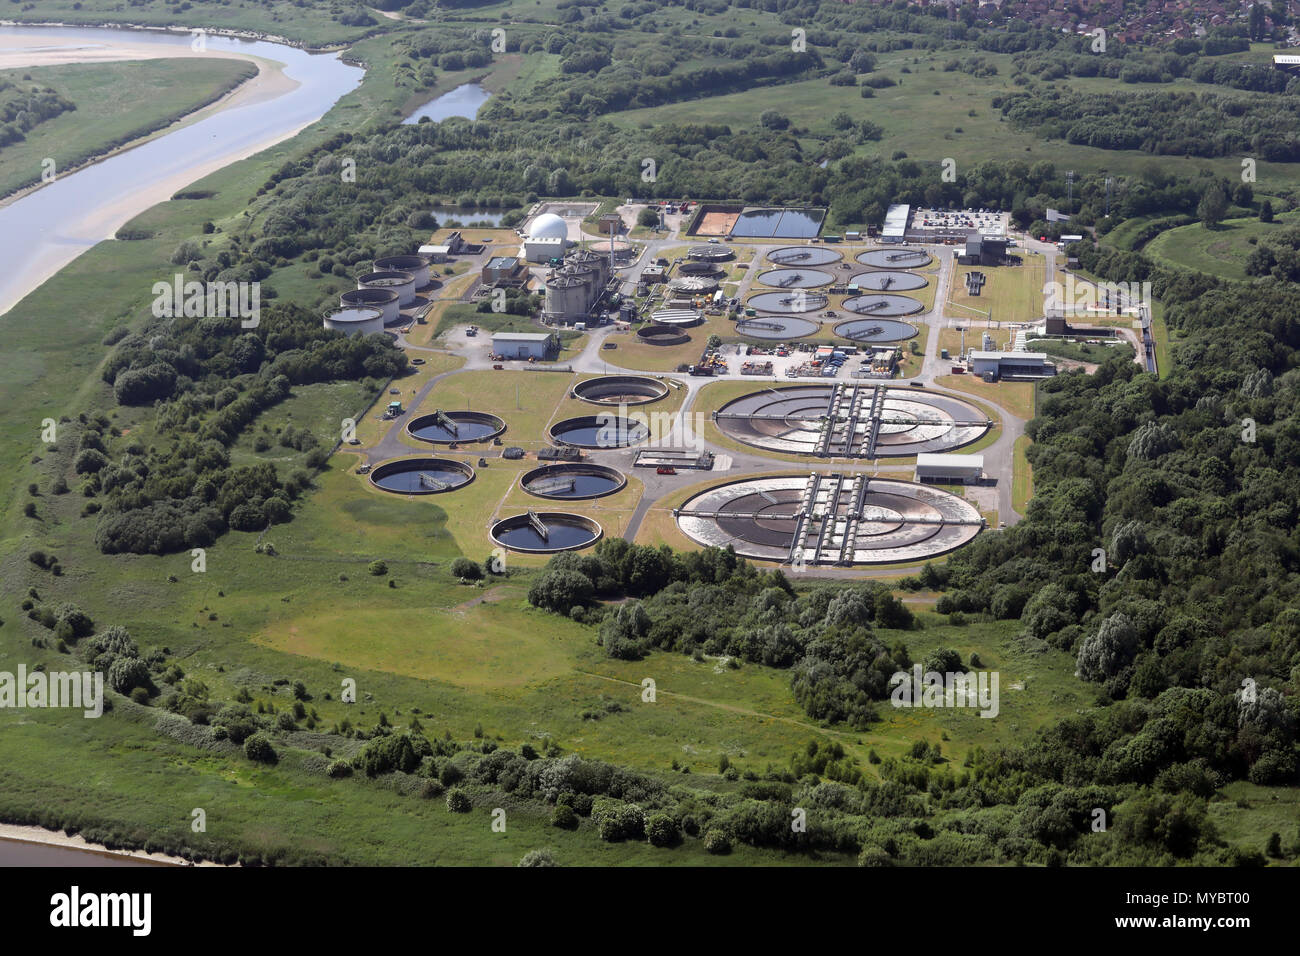 aerial view of a water treatment works, sewage works, at Sankey Bridges by the River Mersey, near Warrington, UK Stock Photo